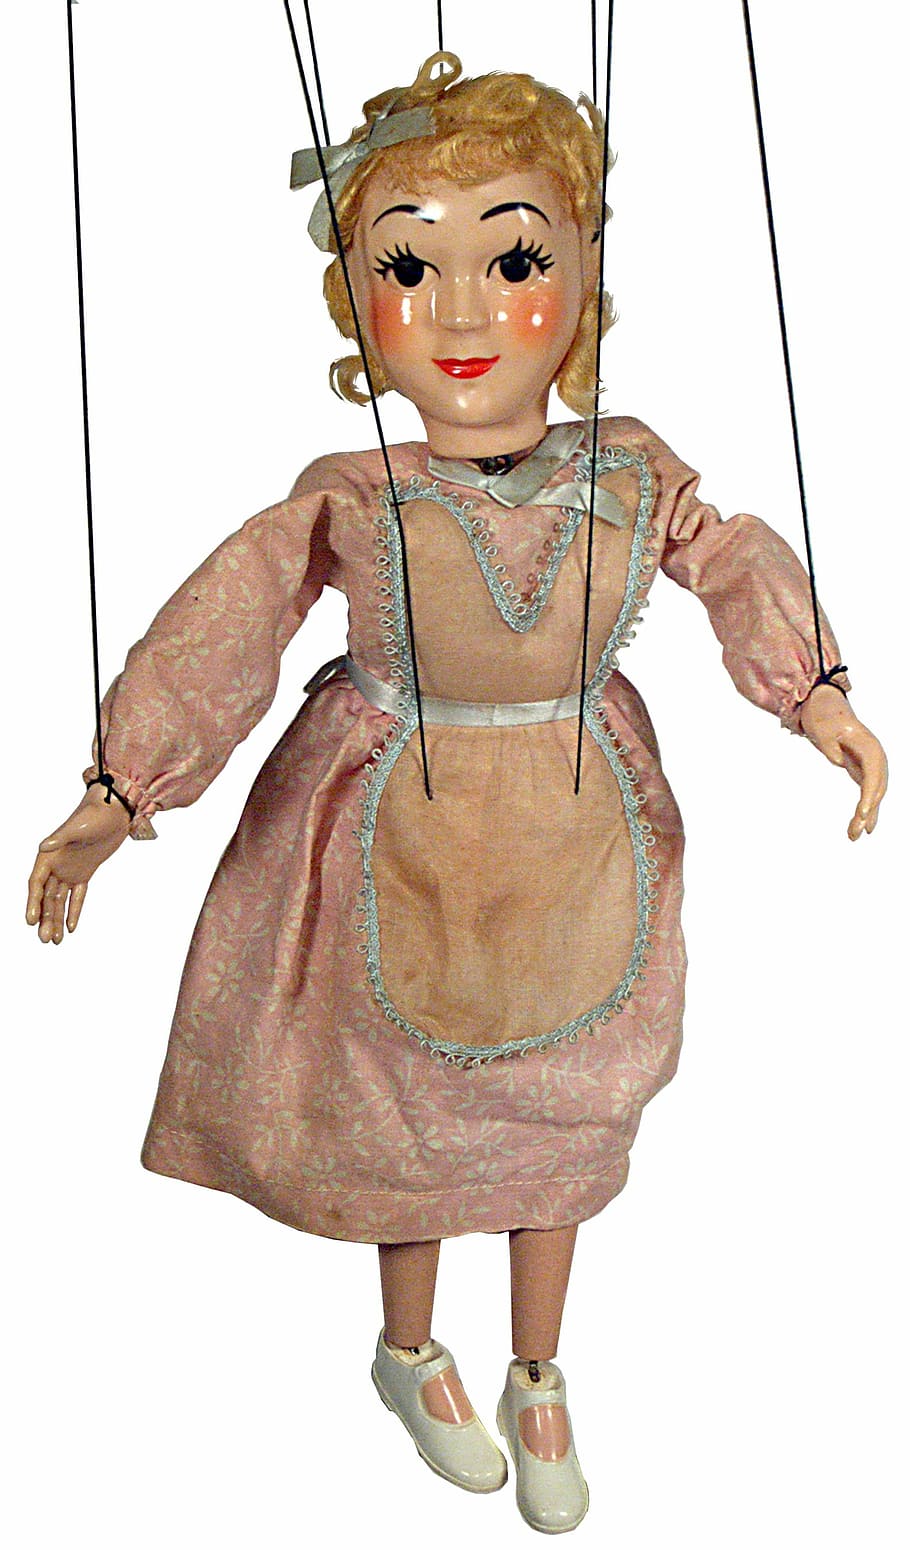 string puppet, Puppet, Strings, Marionette, Control, puppet, strings, doll, human, toy, puppeteer